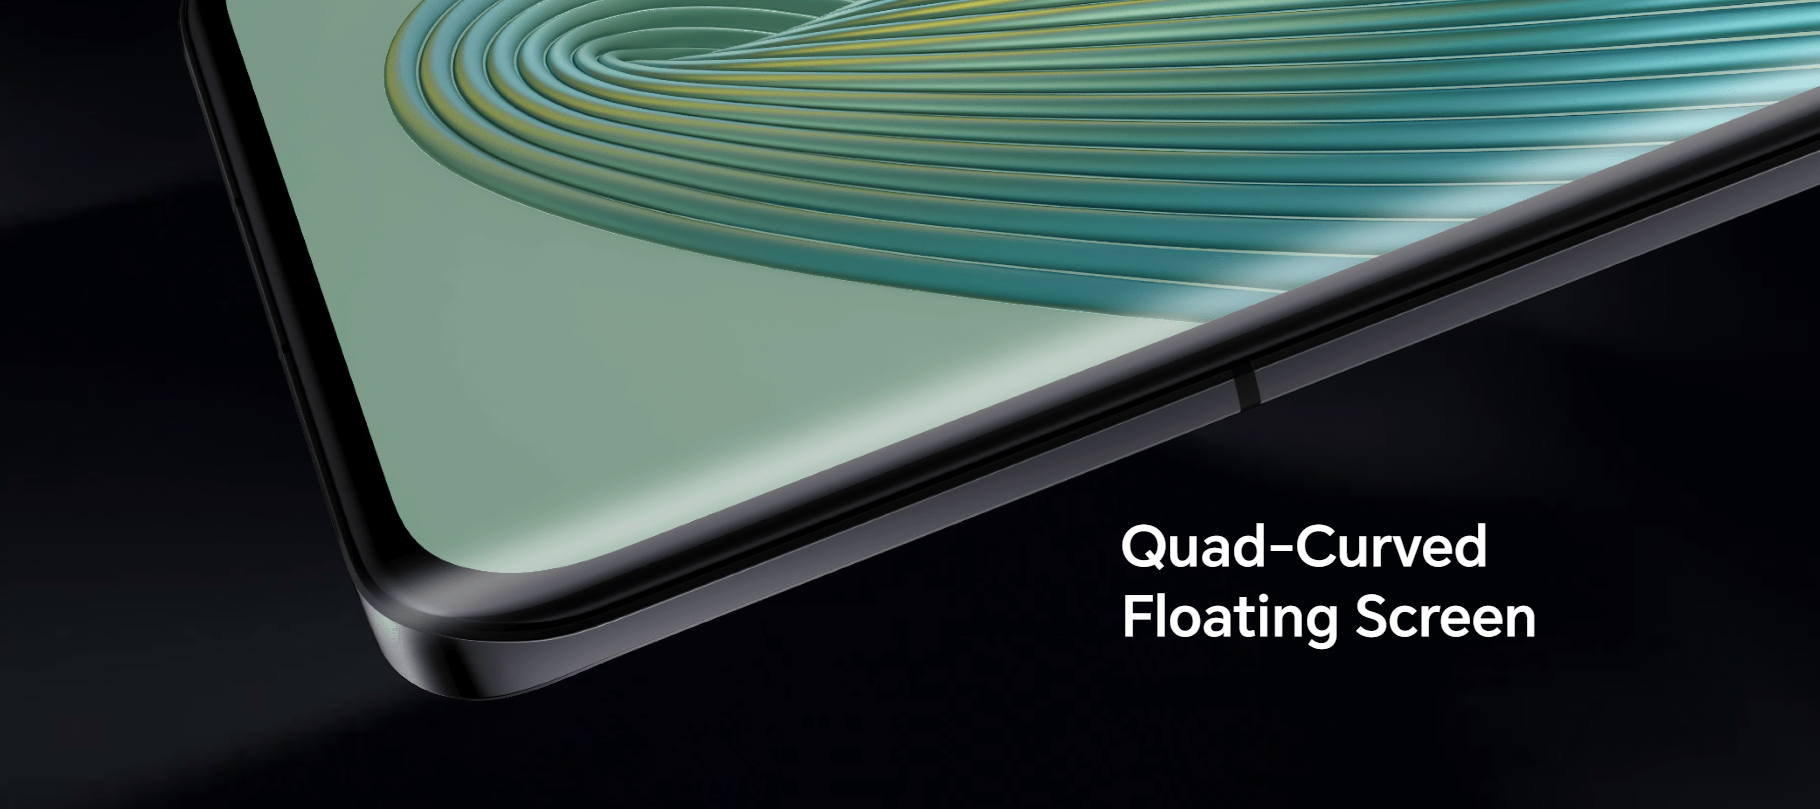 Quad curved floating screen of Honor Magic5 Pro. Photo: HiHonor 